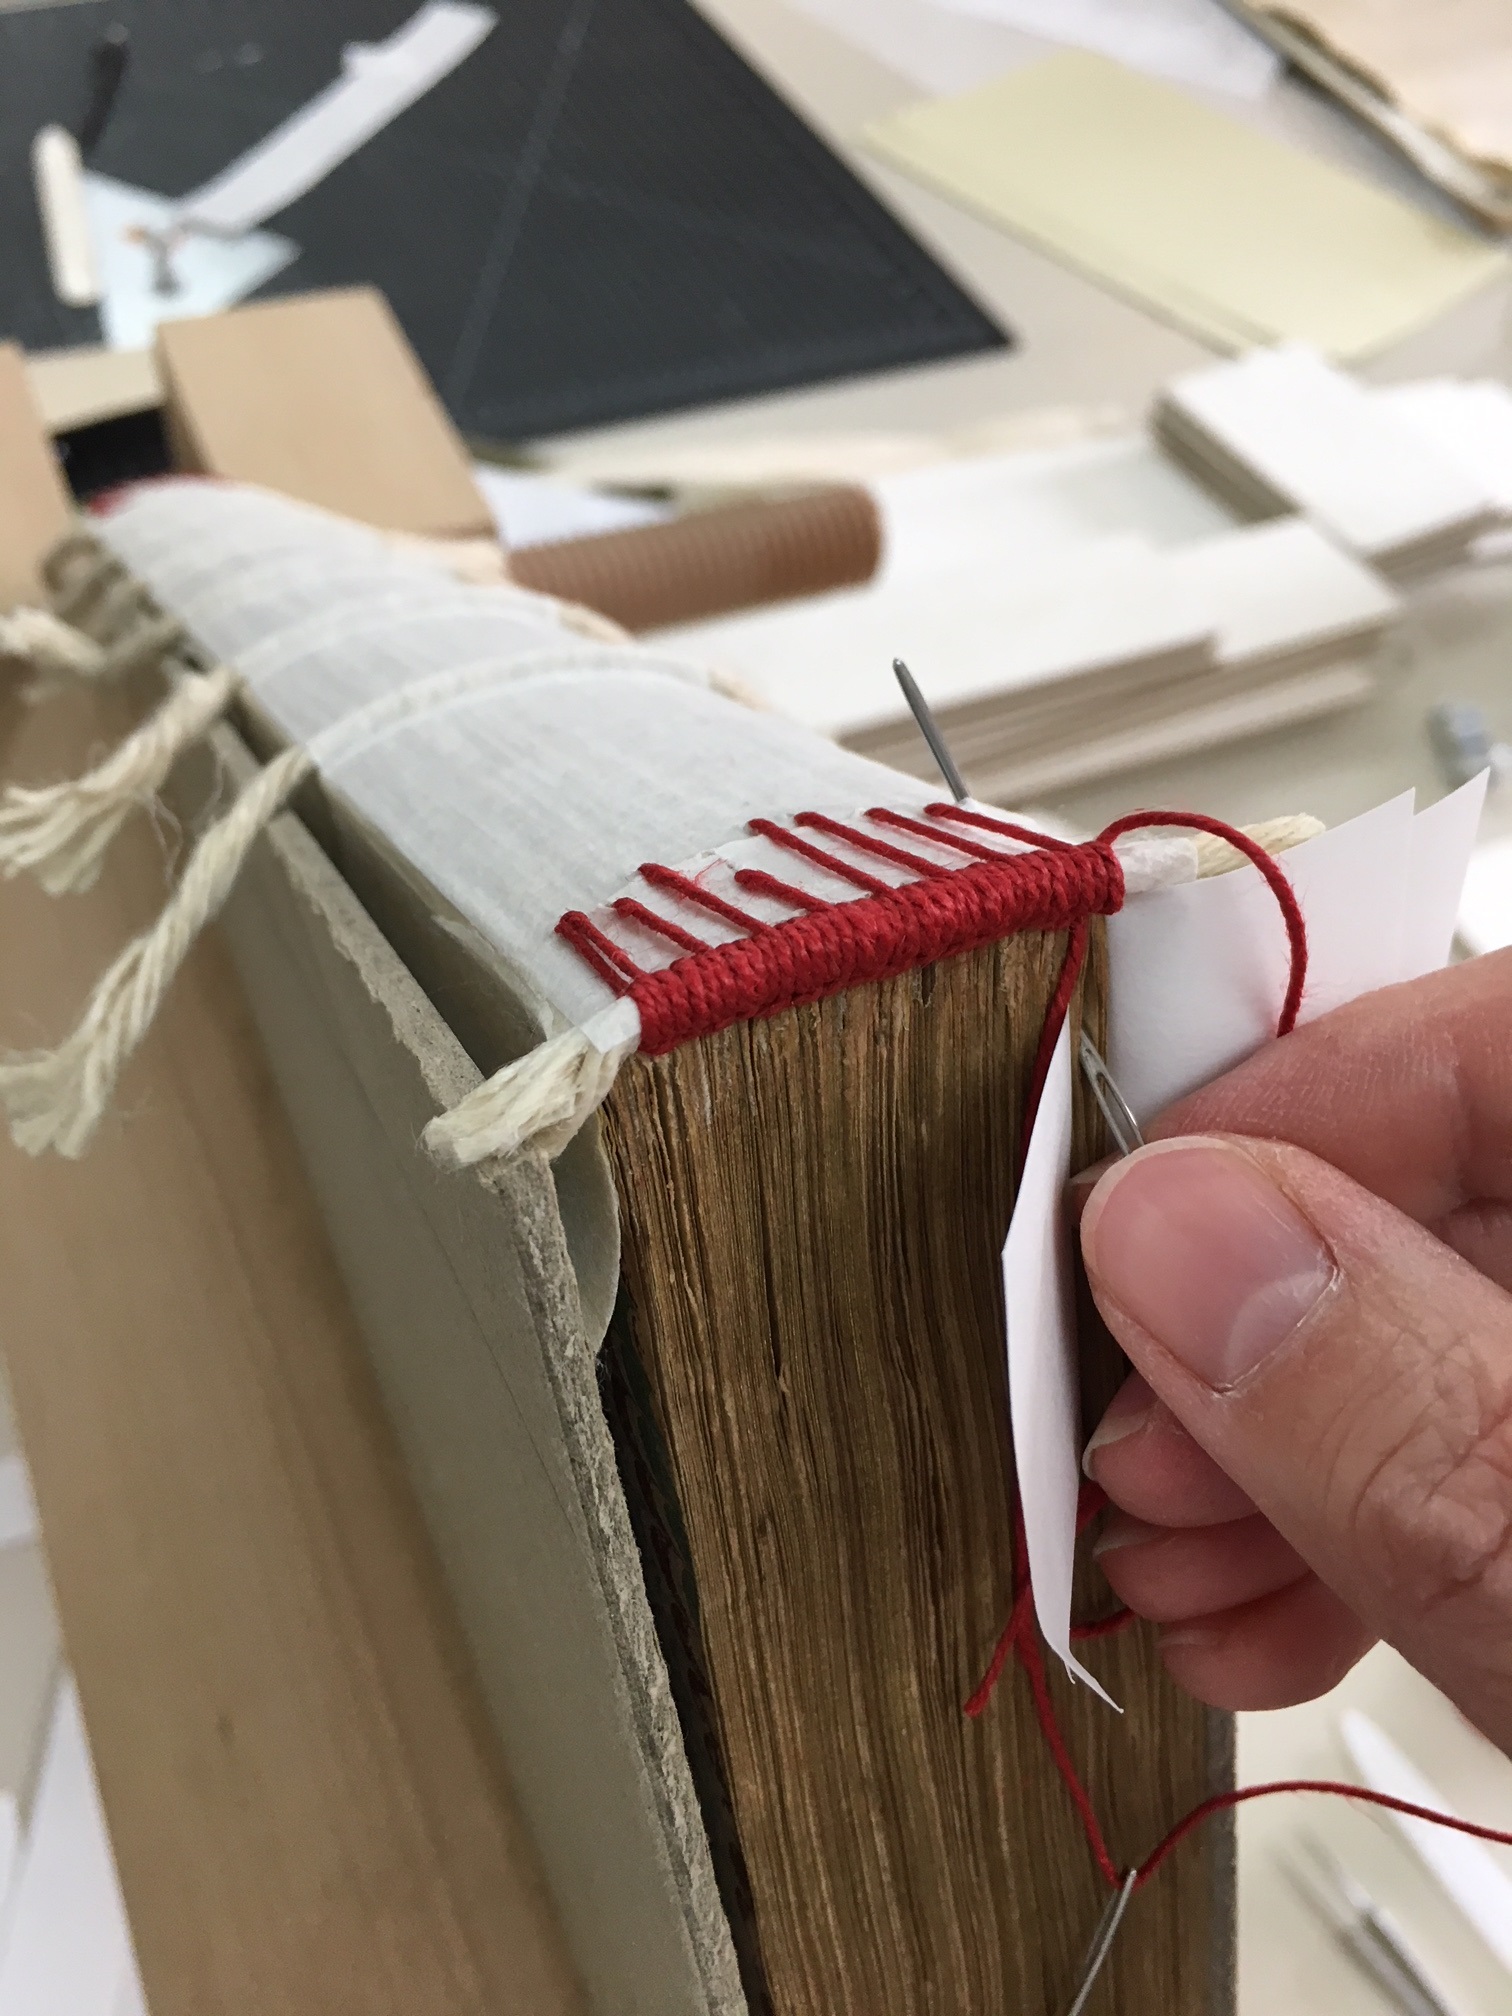 sewing end of book with red thread